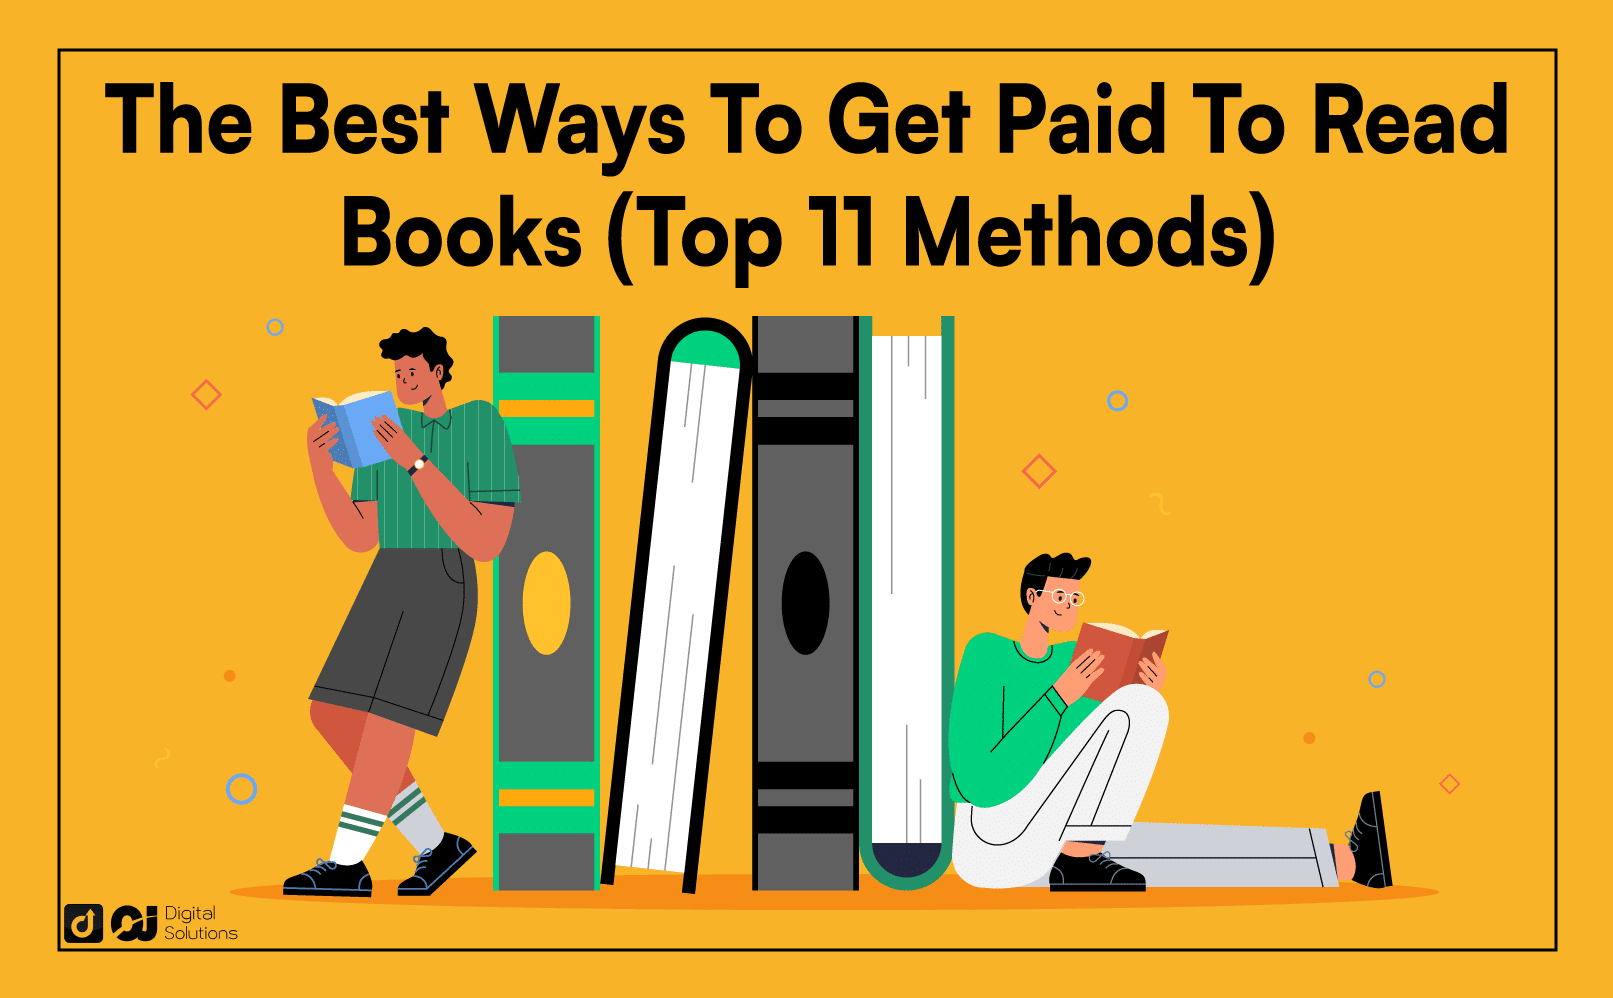 get paid to read books